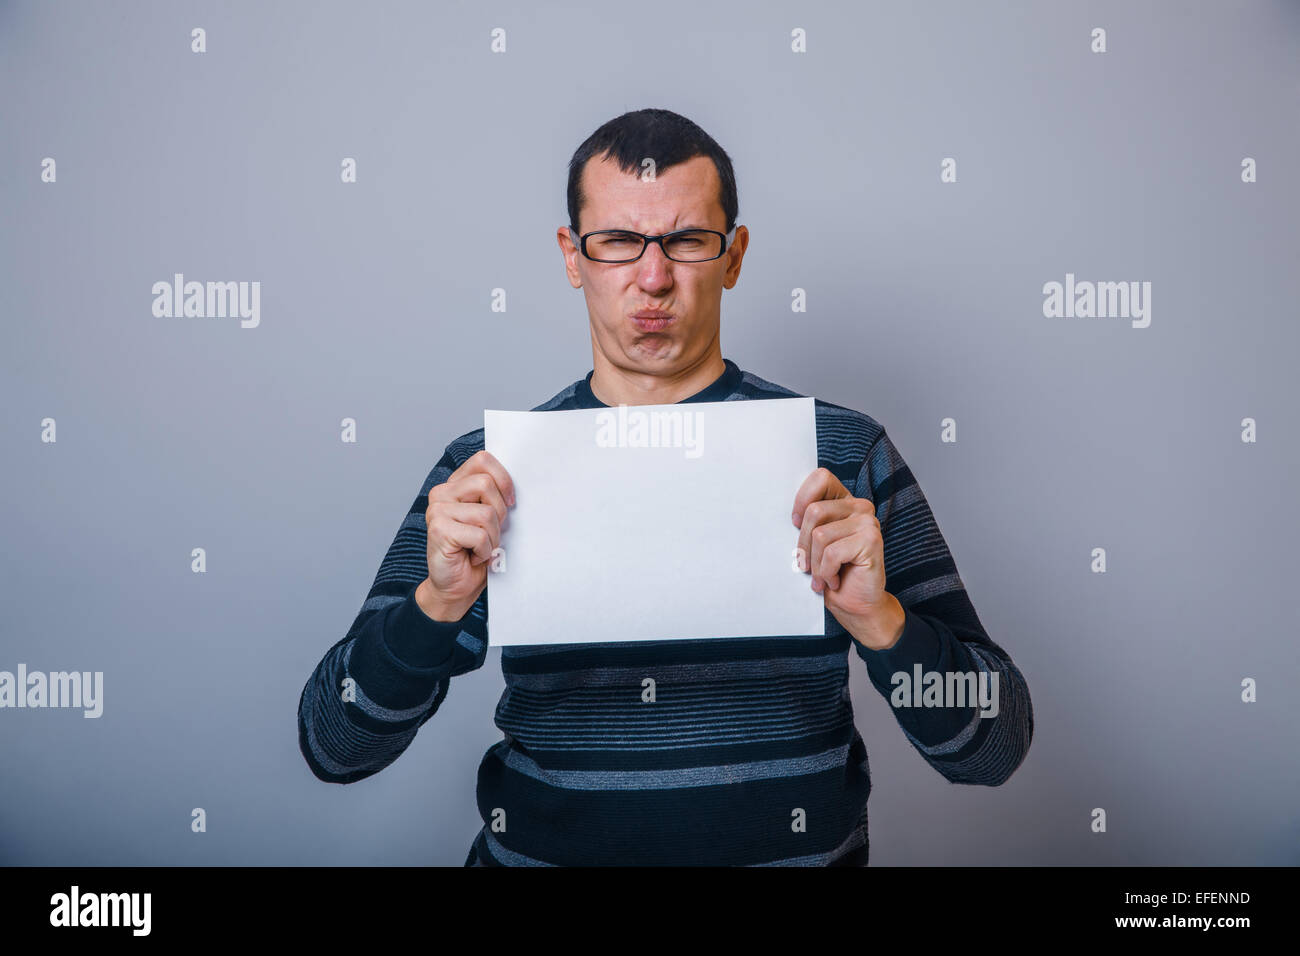 European-looking man 30 years holding a blank sheet of discon Stock Photo